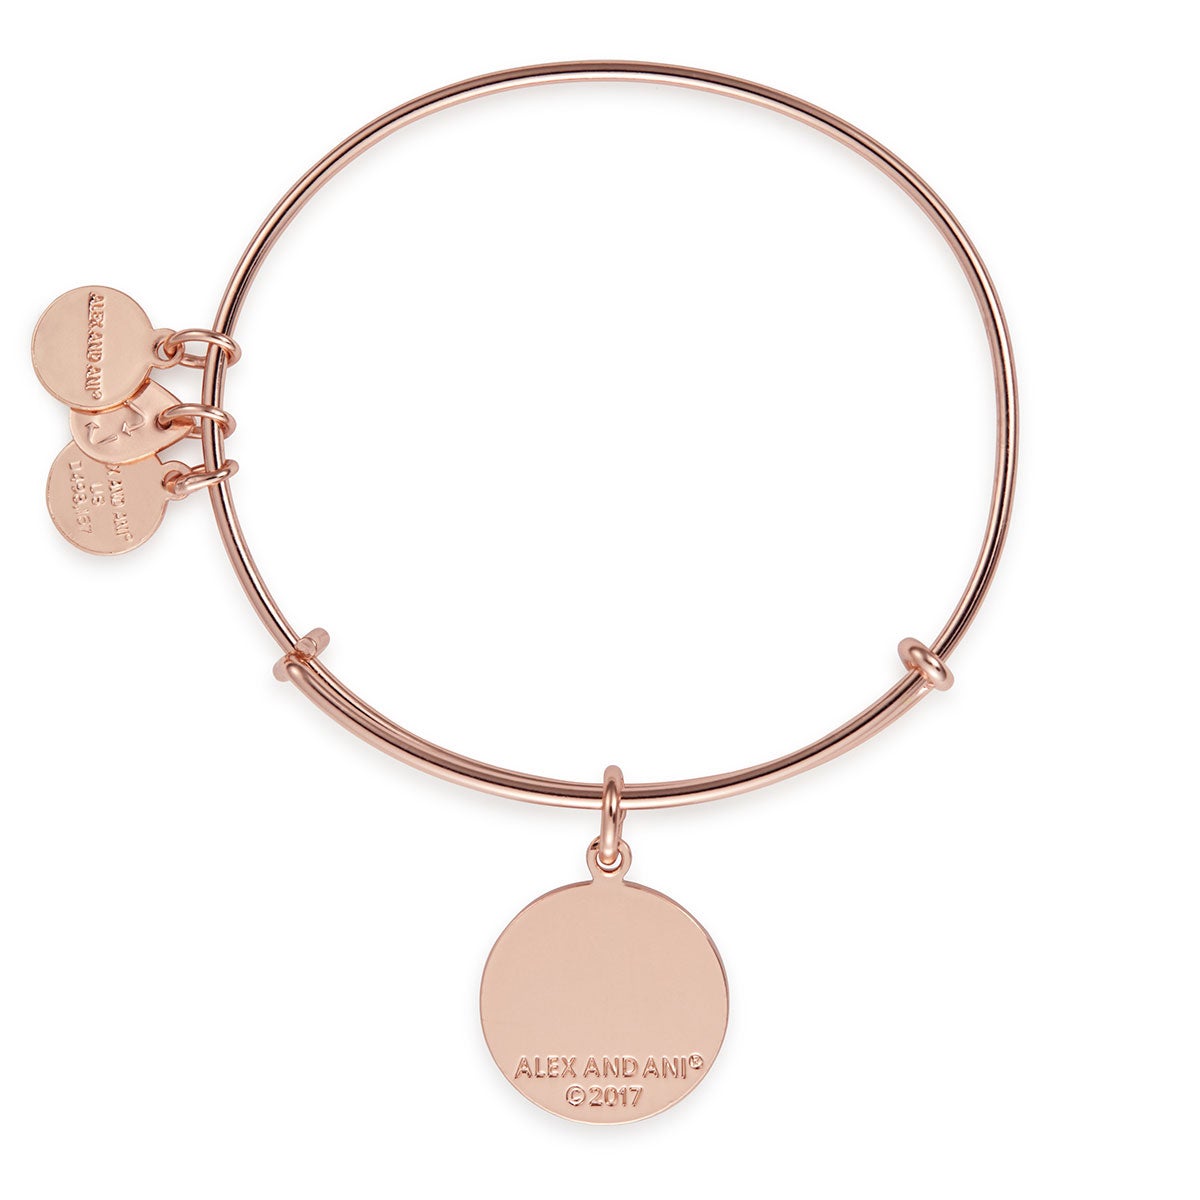 'What Is For You Will Not Pass You' Charm Bangle, Rose Gold